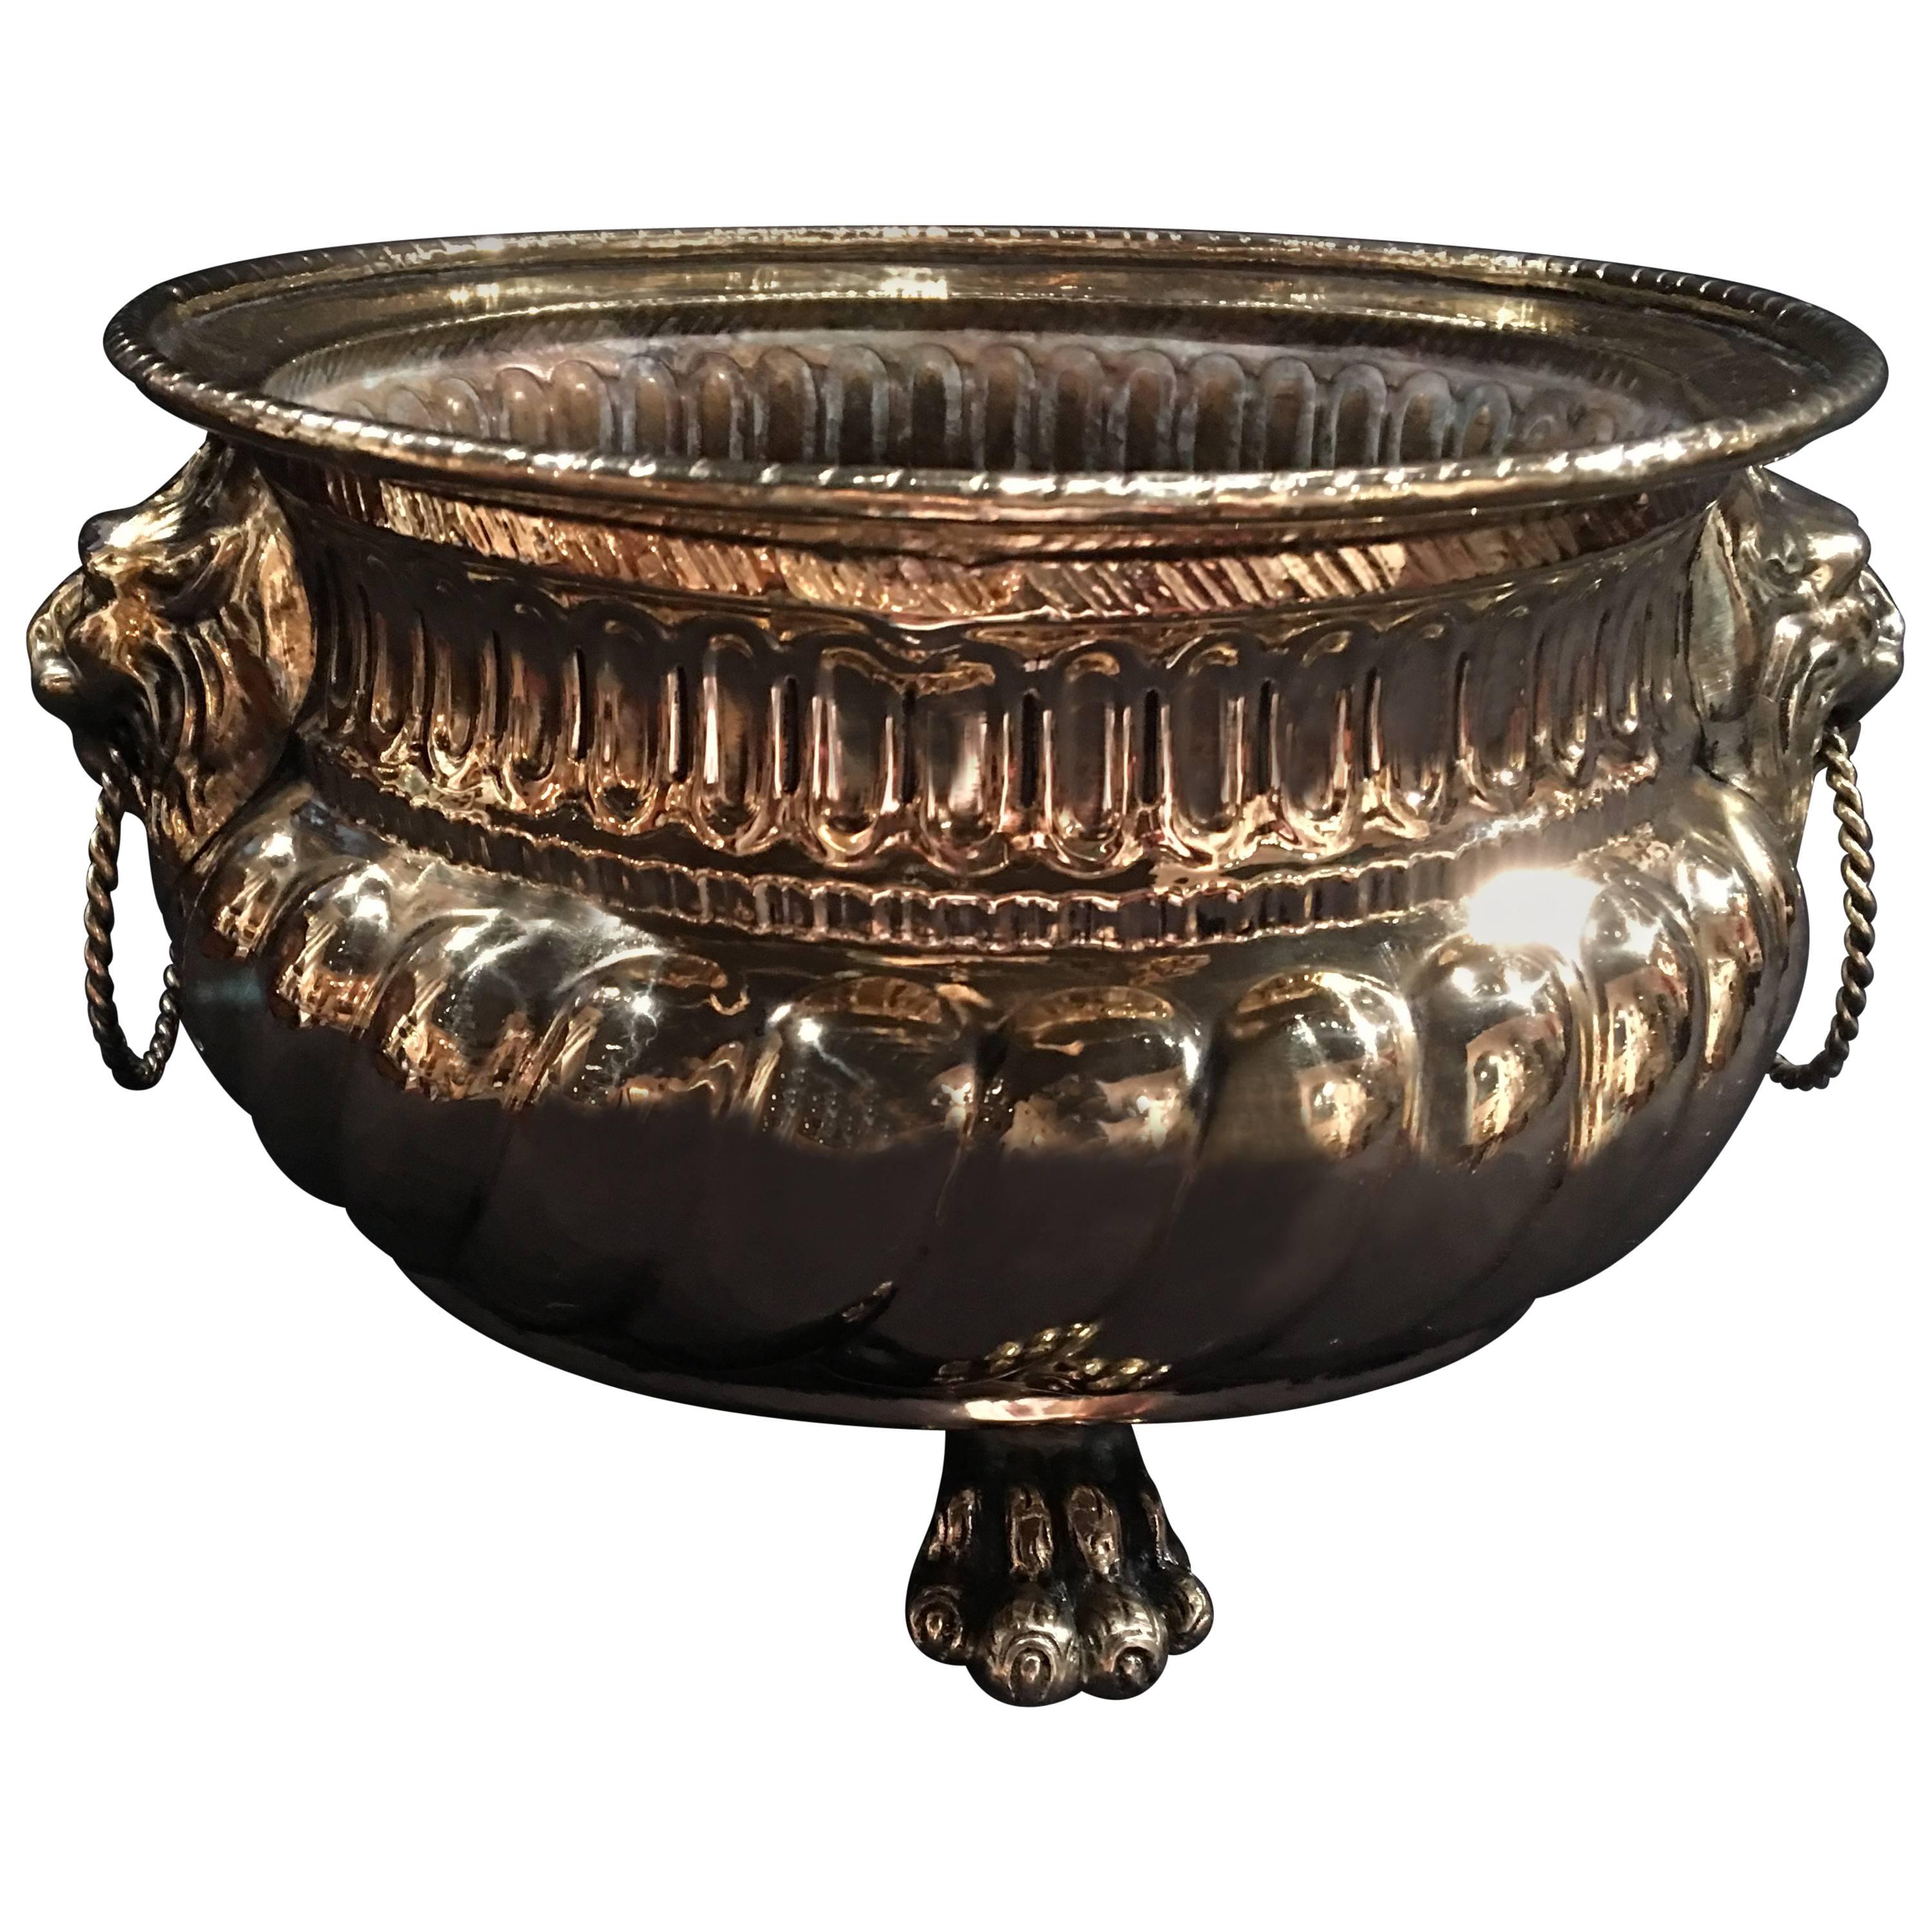 French Polished Brass Jardinière or Container with Lion Handles, 19th Century